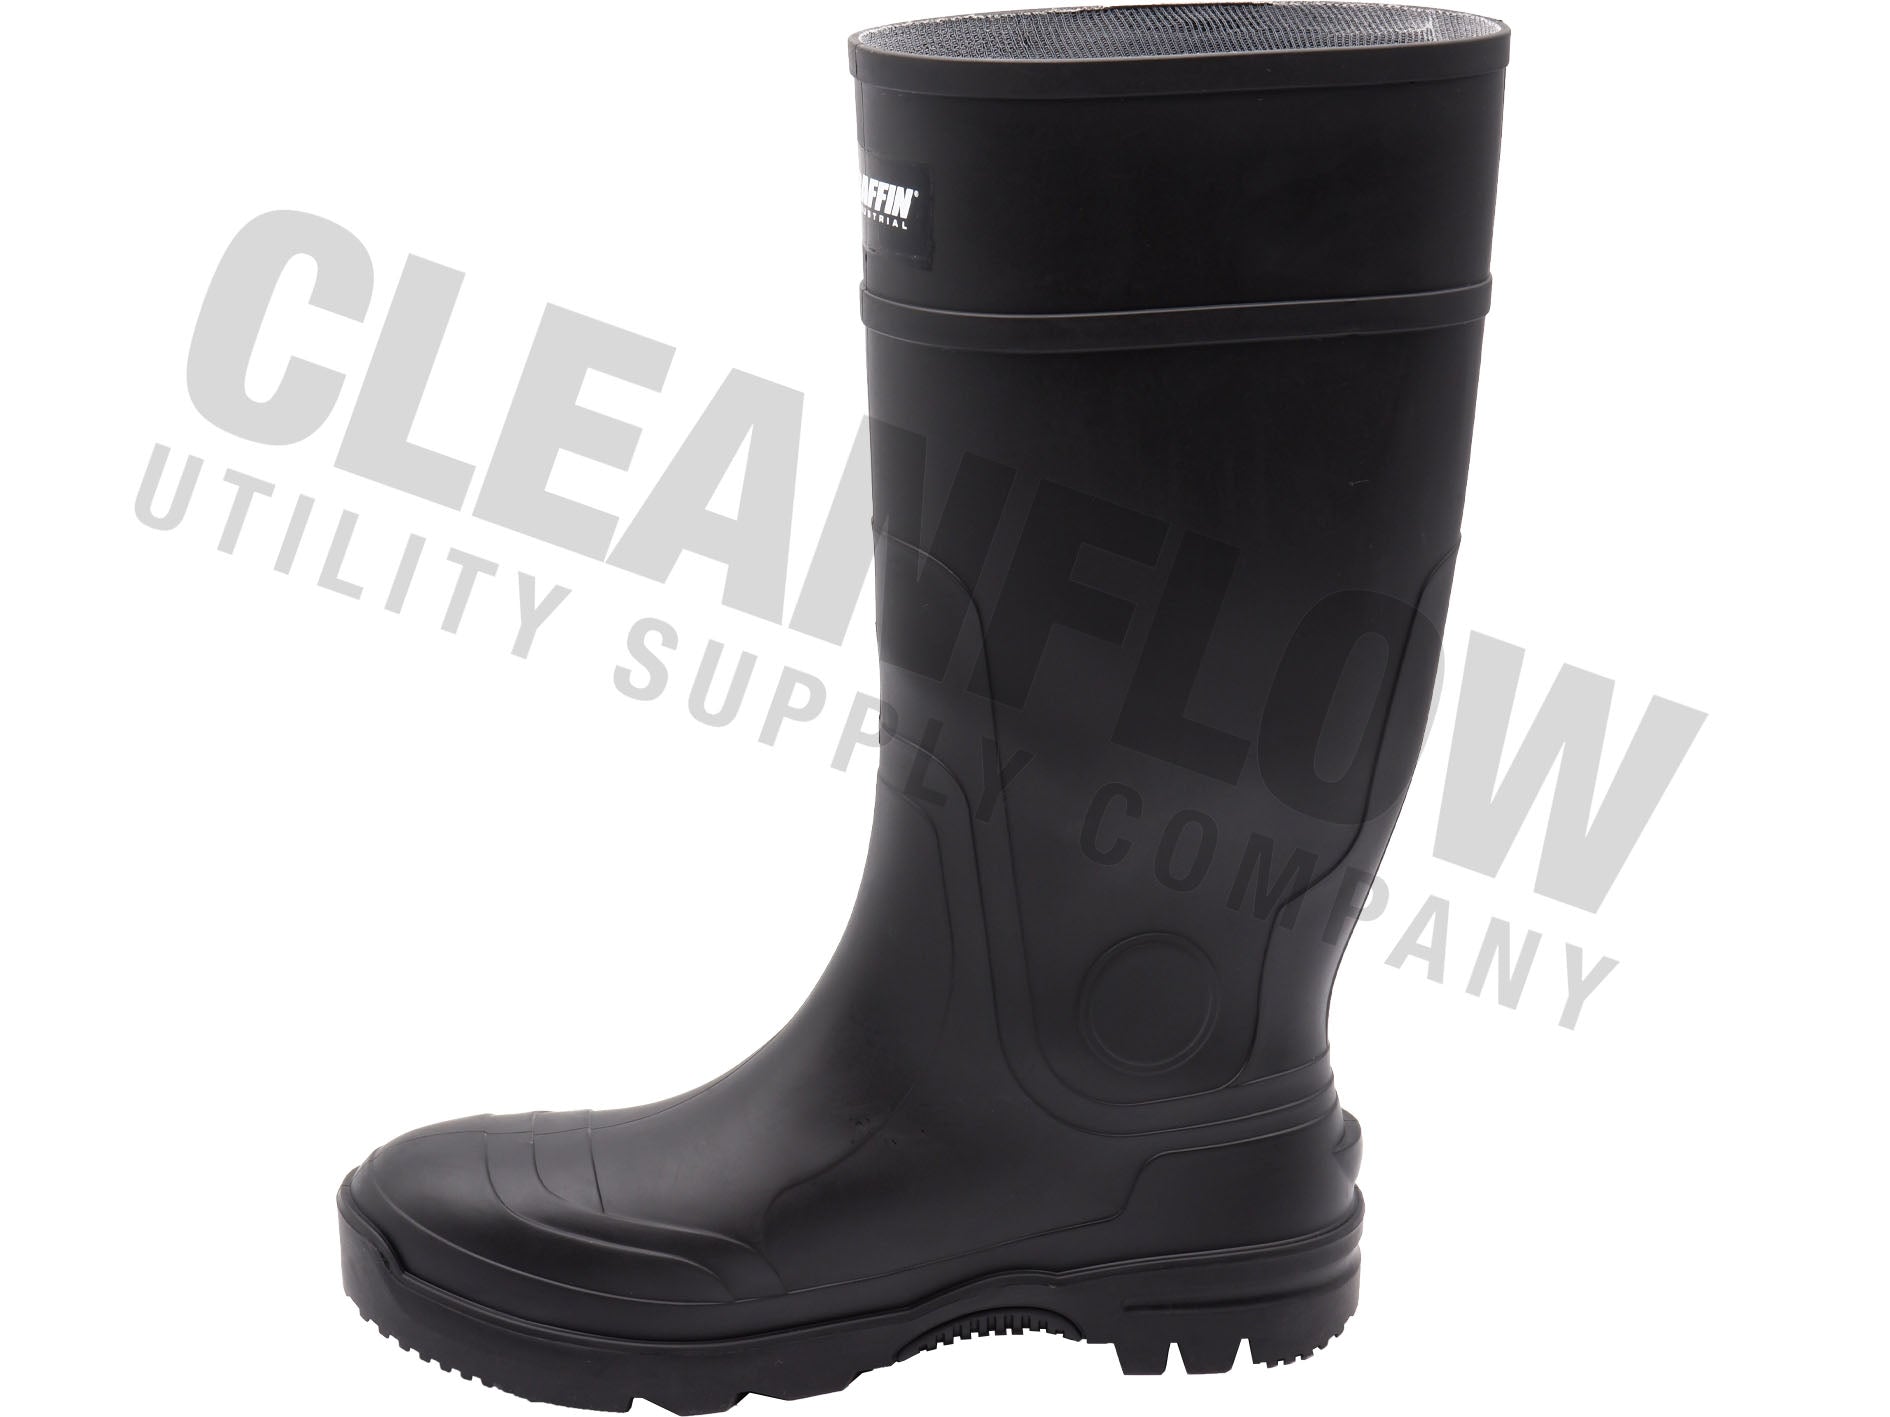 Baffin Men's Safety Boots Blackhawk Steel Toe Steel Plate with Lug Sole Rubber Sizes 7-14